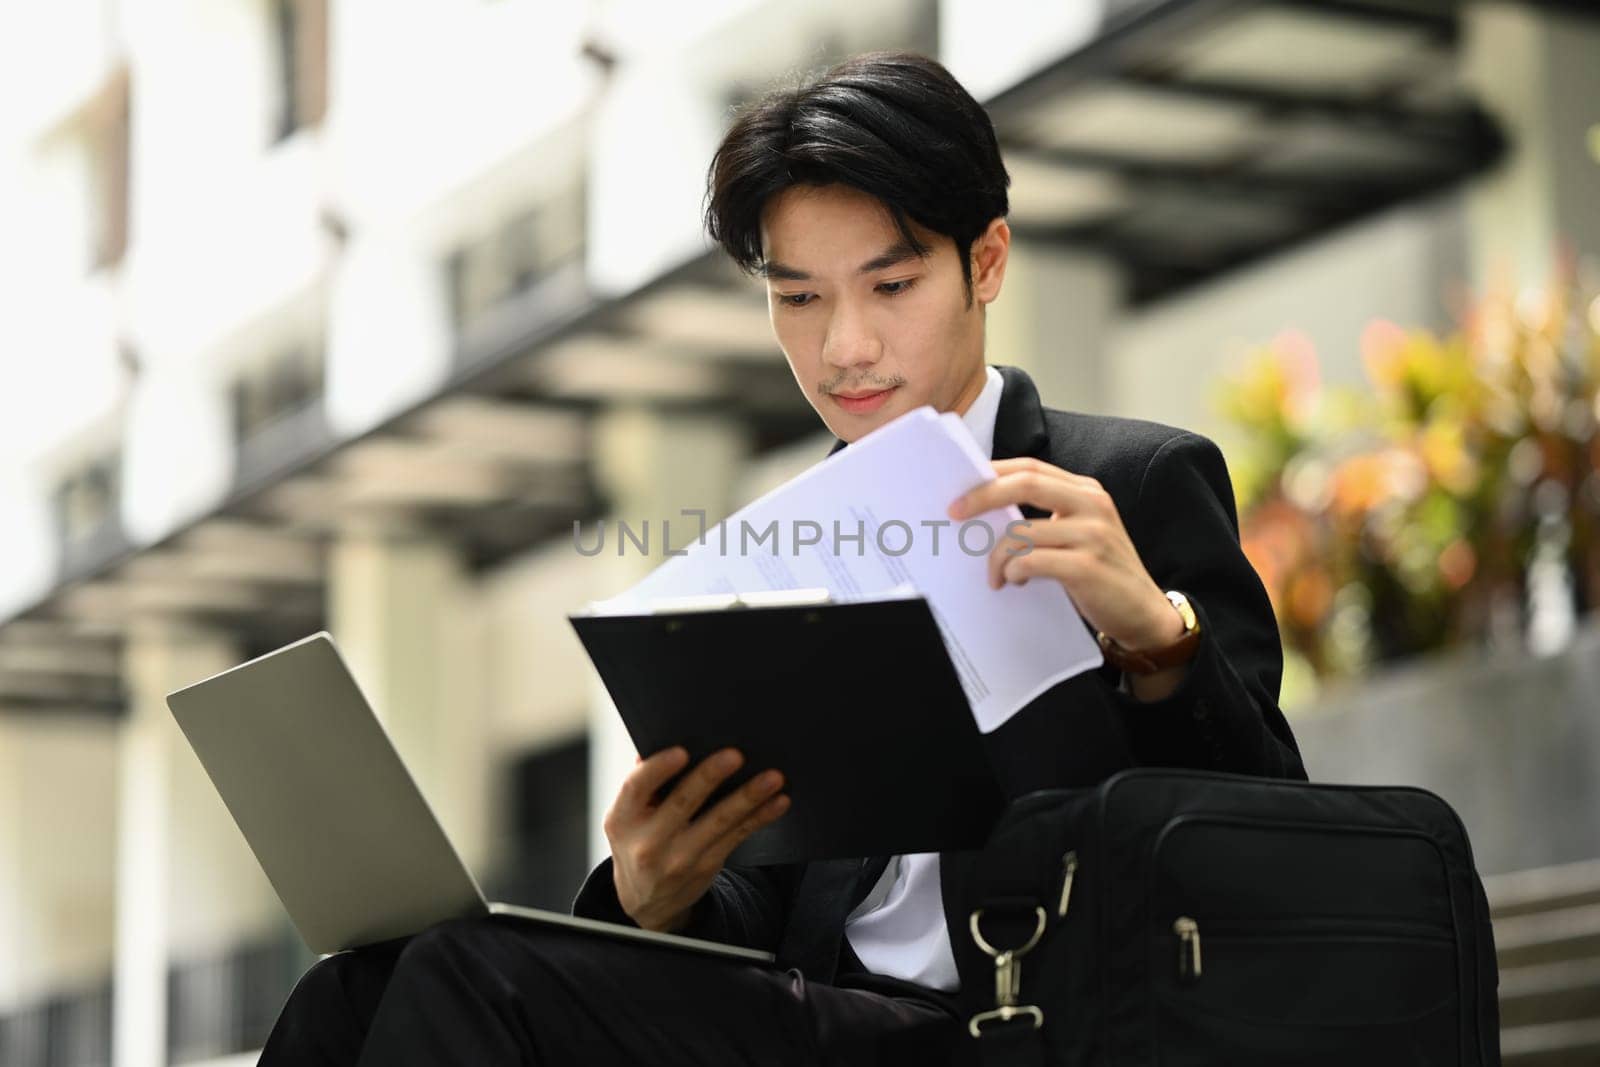 Focused businessman examining reports before going to the office. Business, technology and lifestyle.